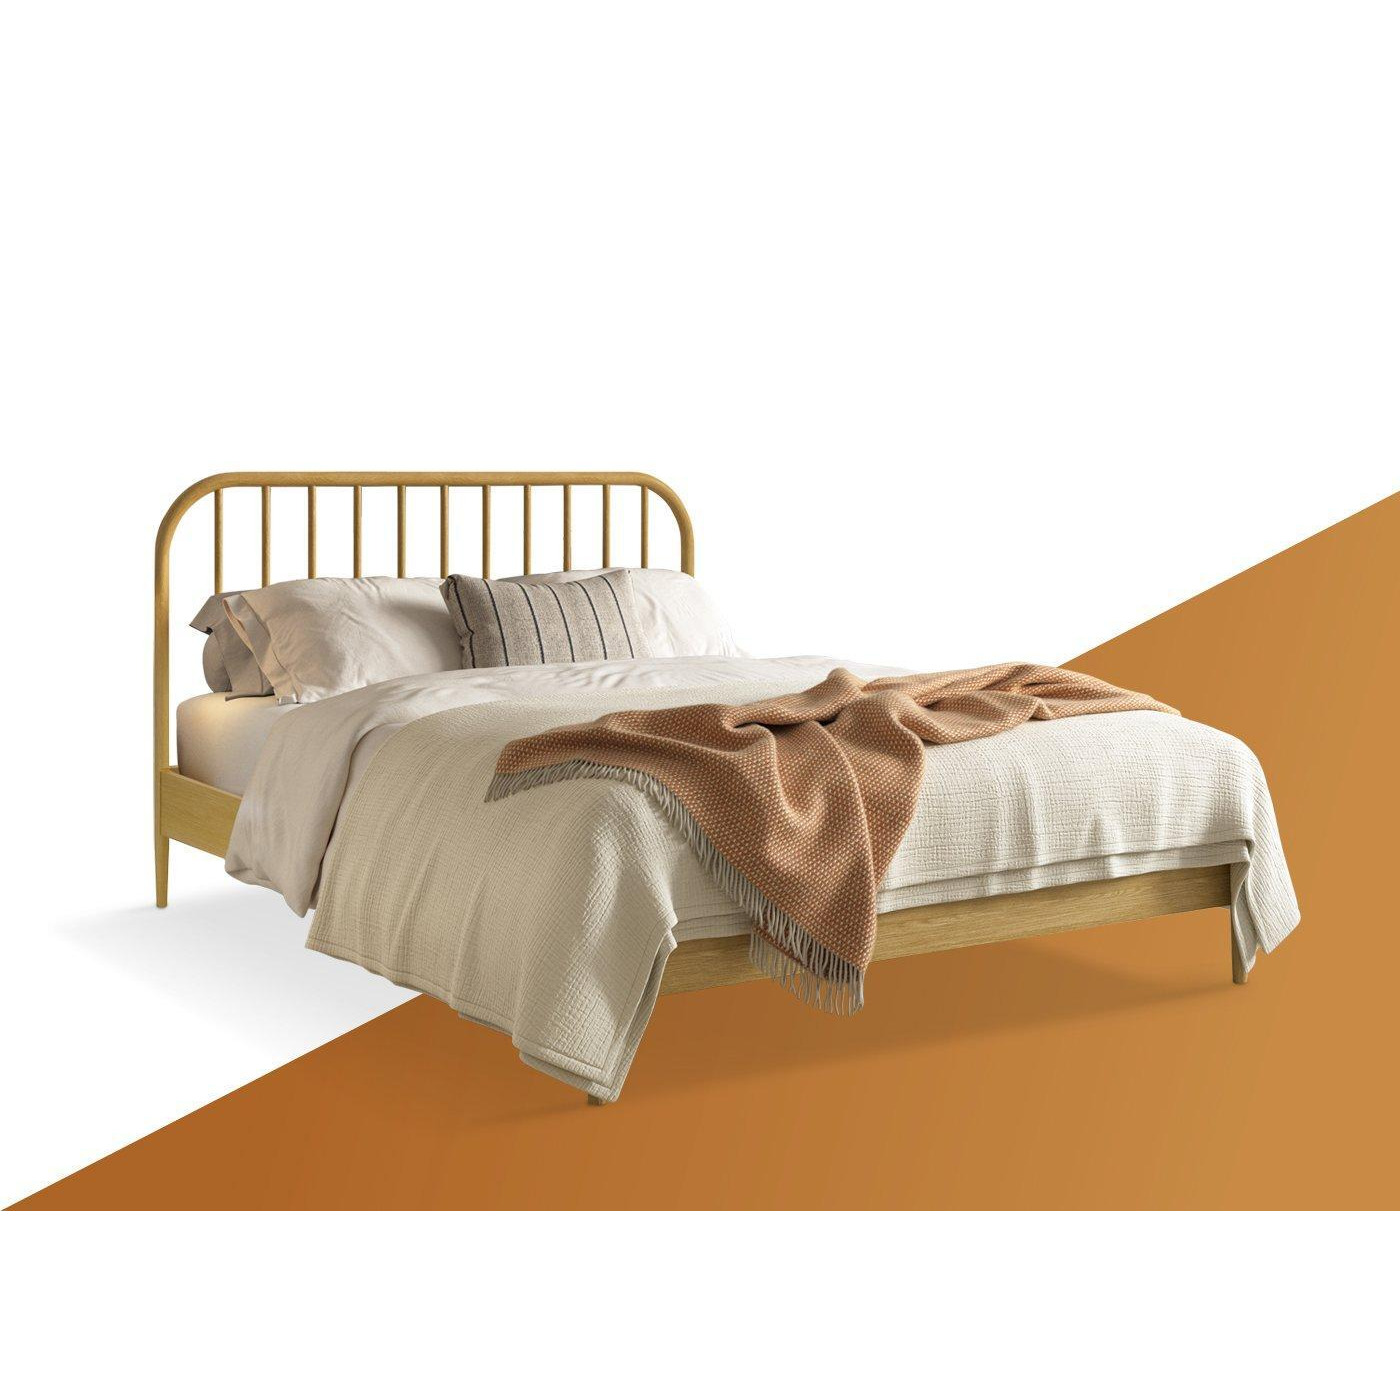 Trafford Wooden Bed Frame - 4'6 Double - Brown